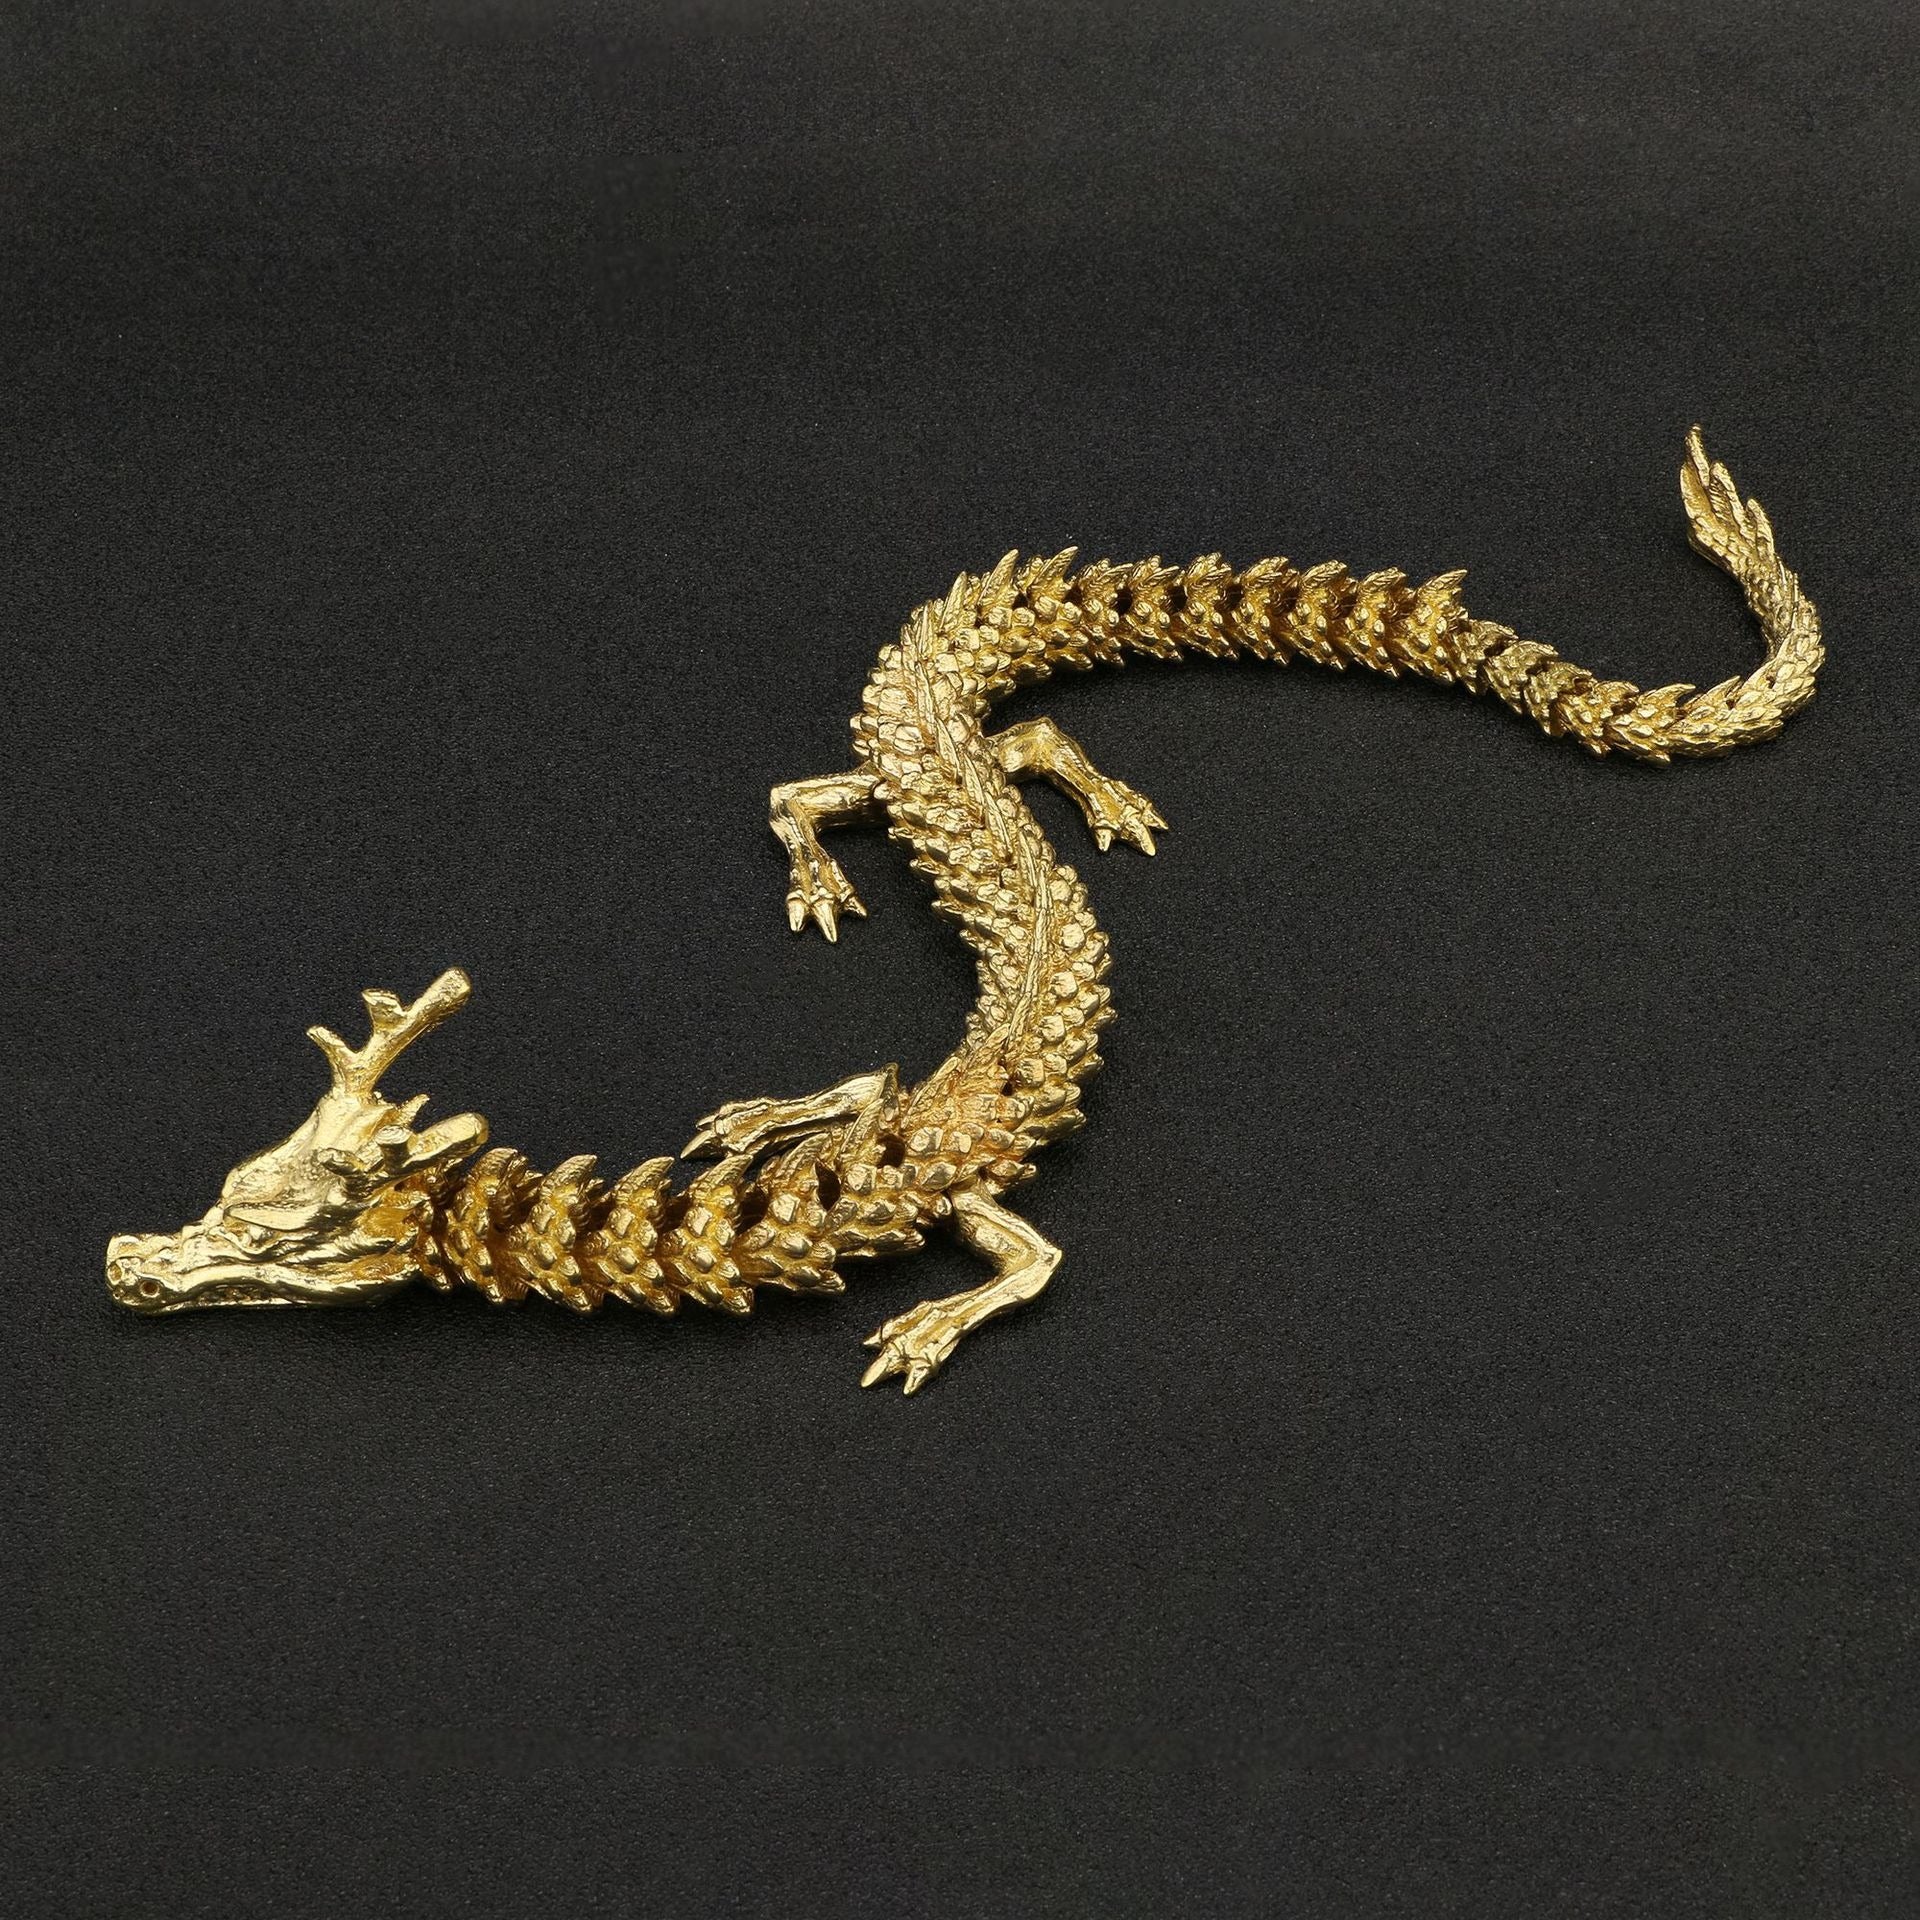 This stunning Antique Zodiac Collectable Dragon is crafted with intricate detail and care. Its unique design presents one of the most valuable collectables for any lover of Chinese dragons and zodiac signs. A truly inspiring piece!